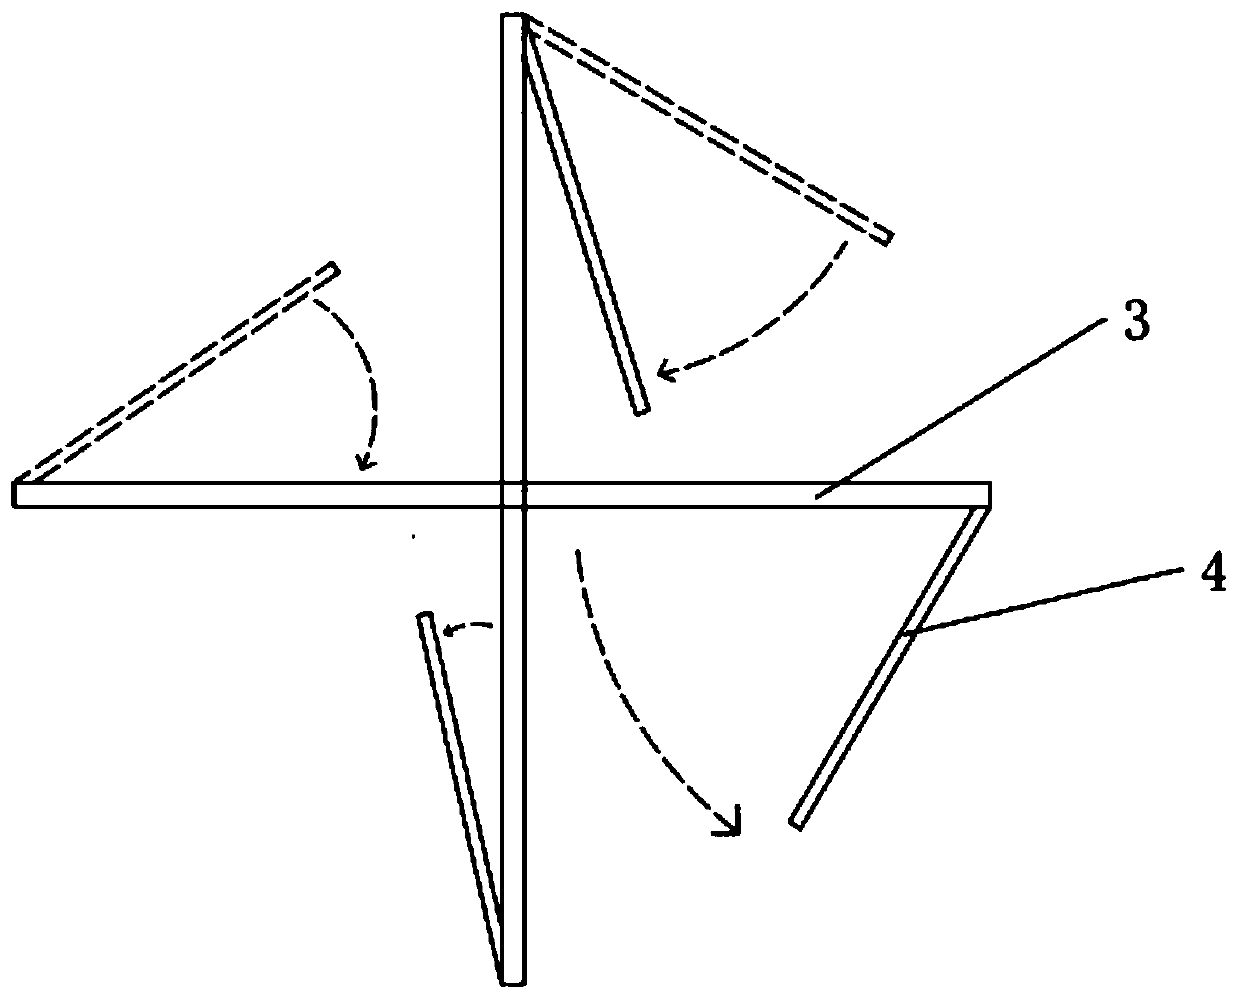 Vertical axis and moving blades combined windmill